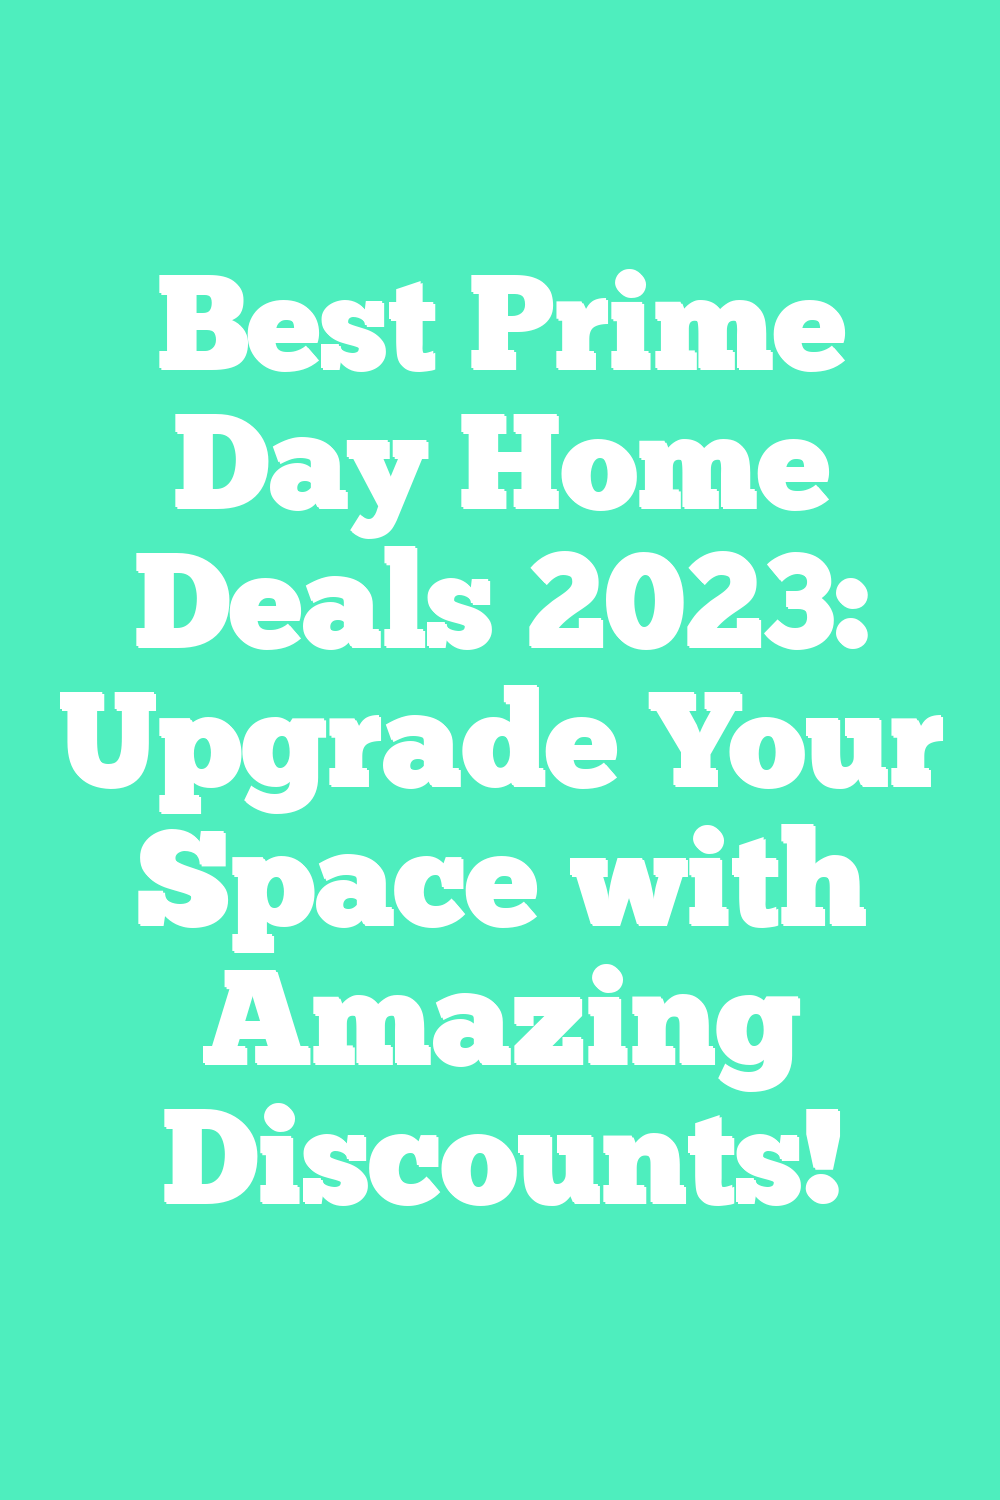 https://kristiandenver.com/wp-content/uploads/2023/07/Best-Prime-Day-Home-Deals-2023-Upgrade-Your-Space-with-Amazing-Discounts.png